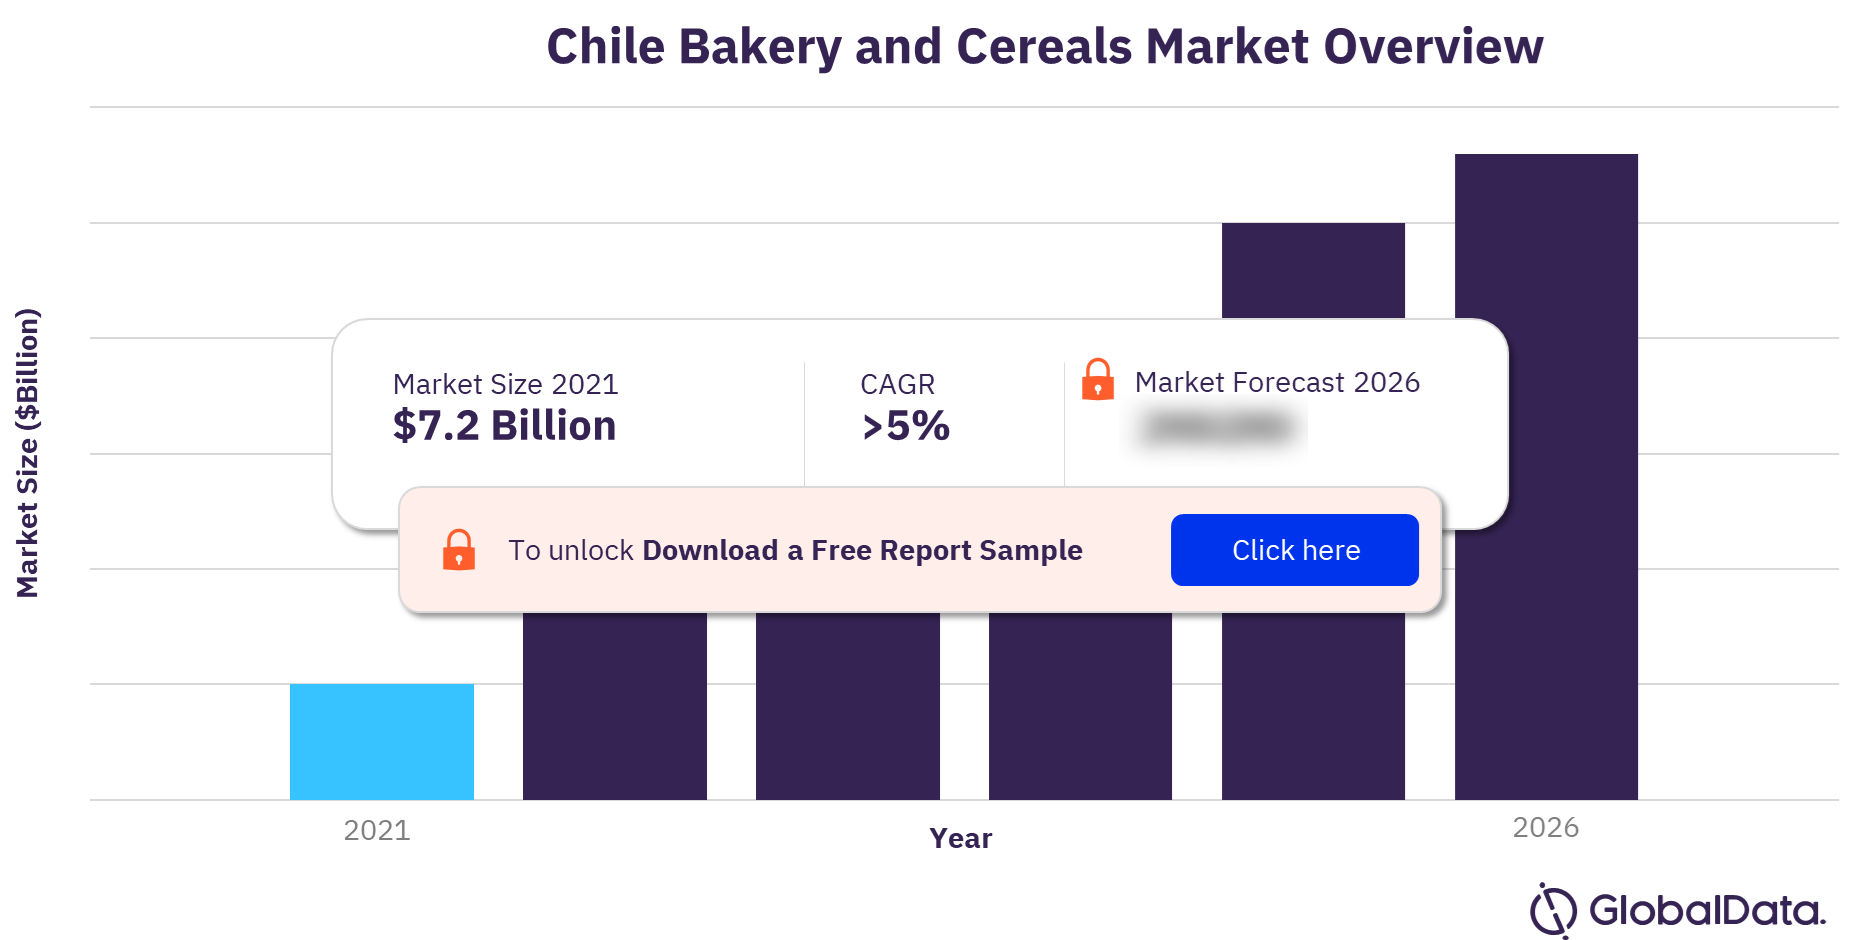 Chile Bakery & Cereals Market Outlook